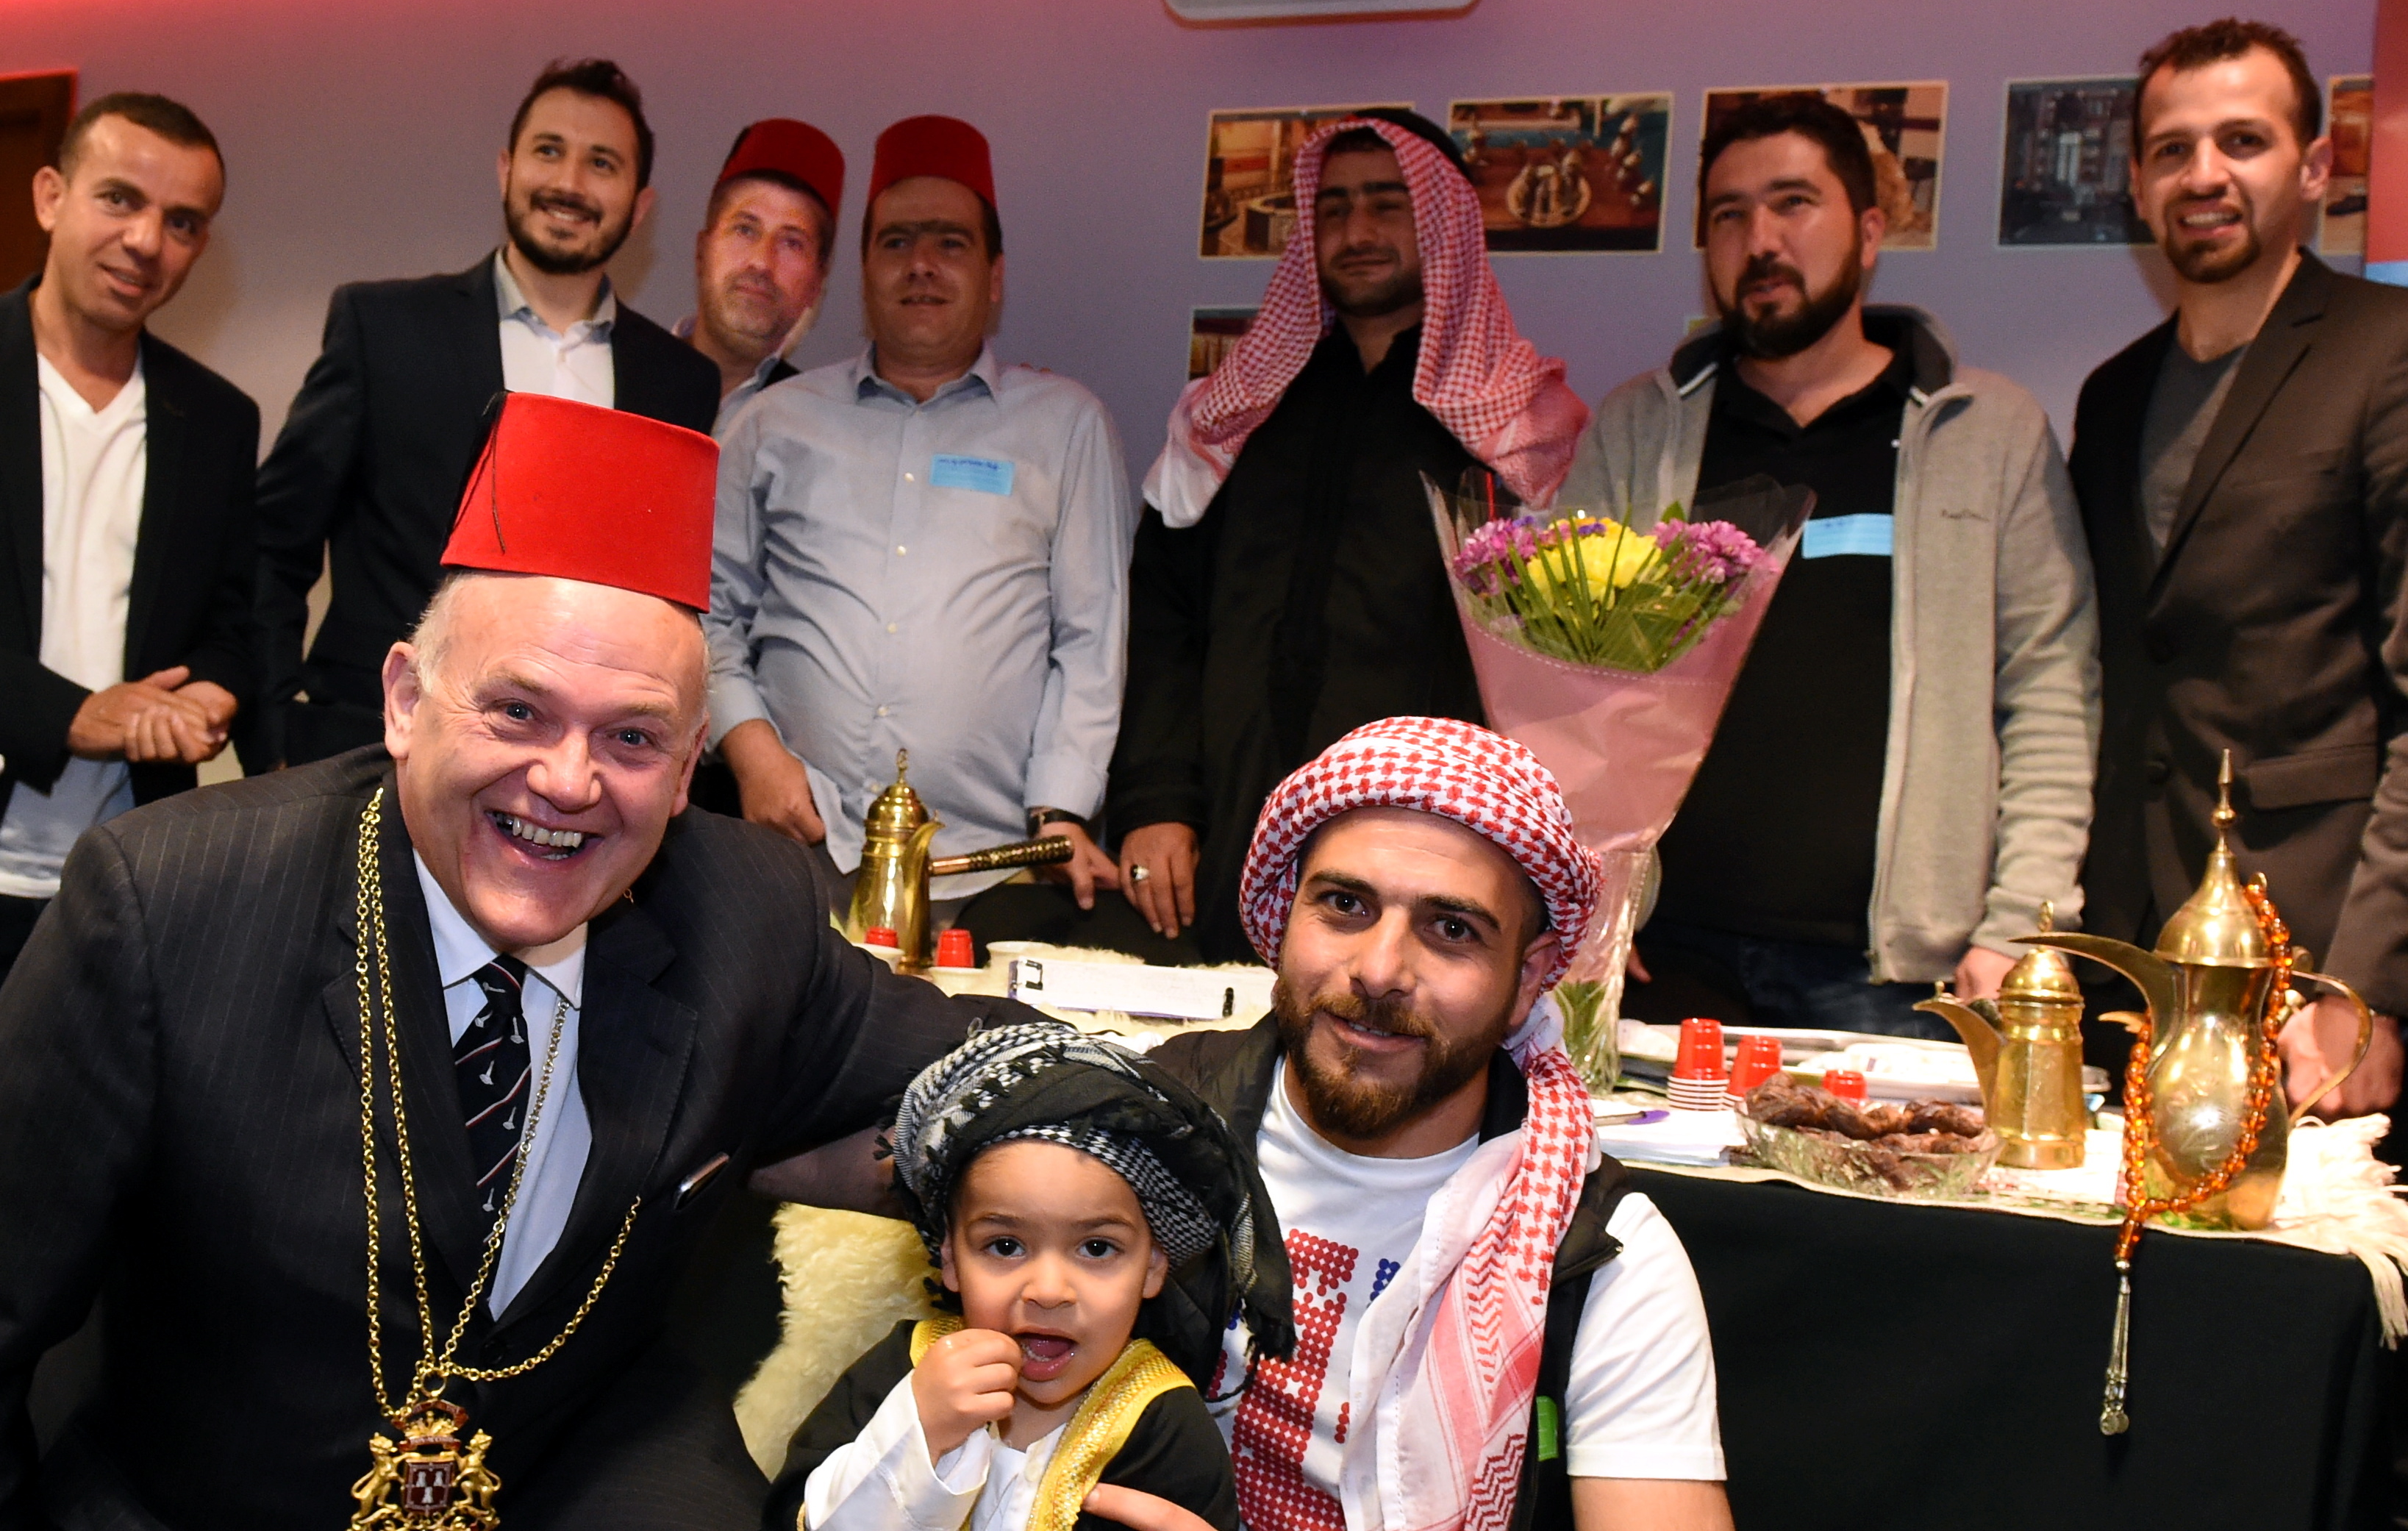 In the picture are Lord Provost Barney Crockett with Syrian people who hope to open a cafe in the city